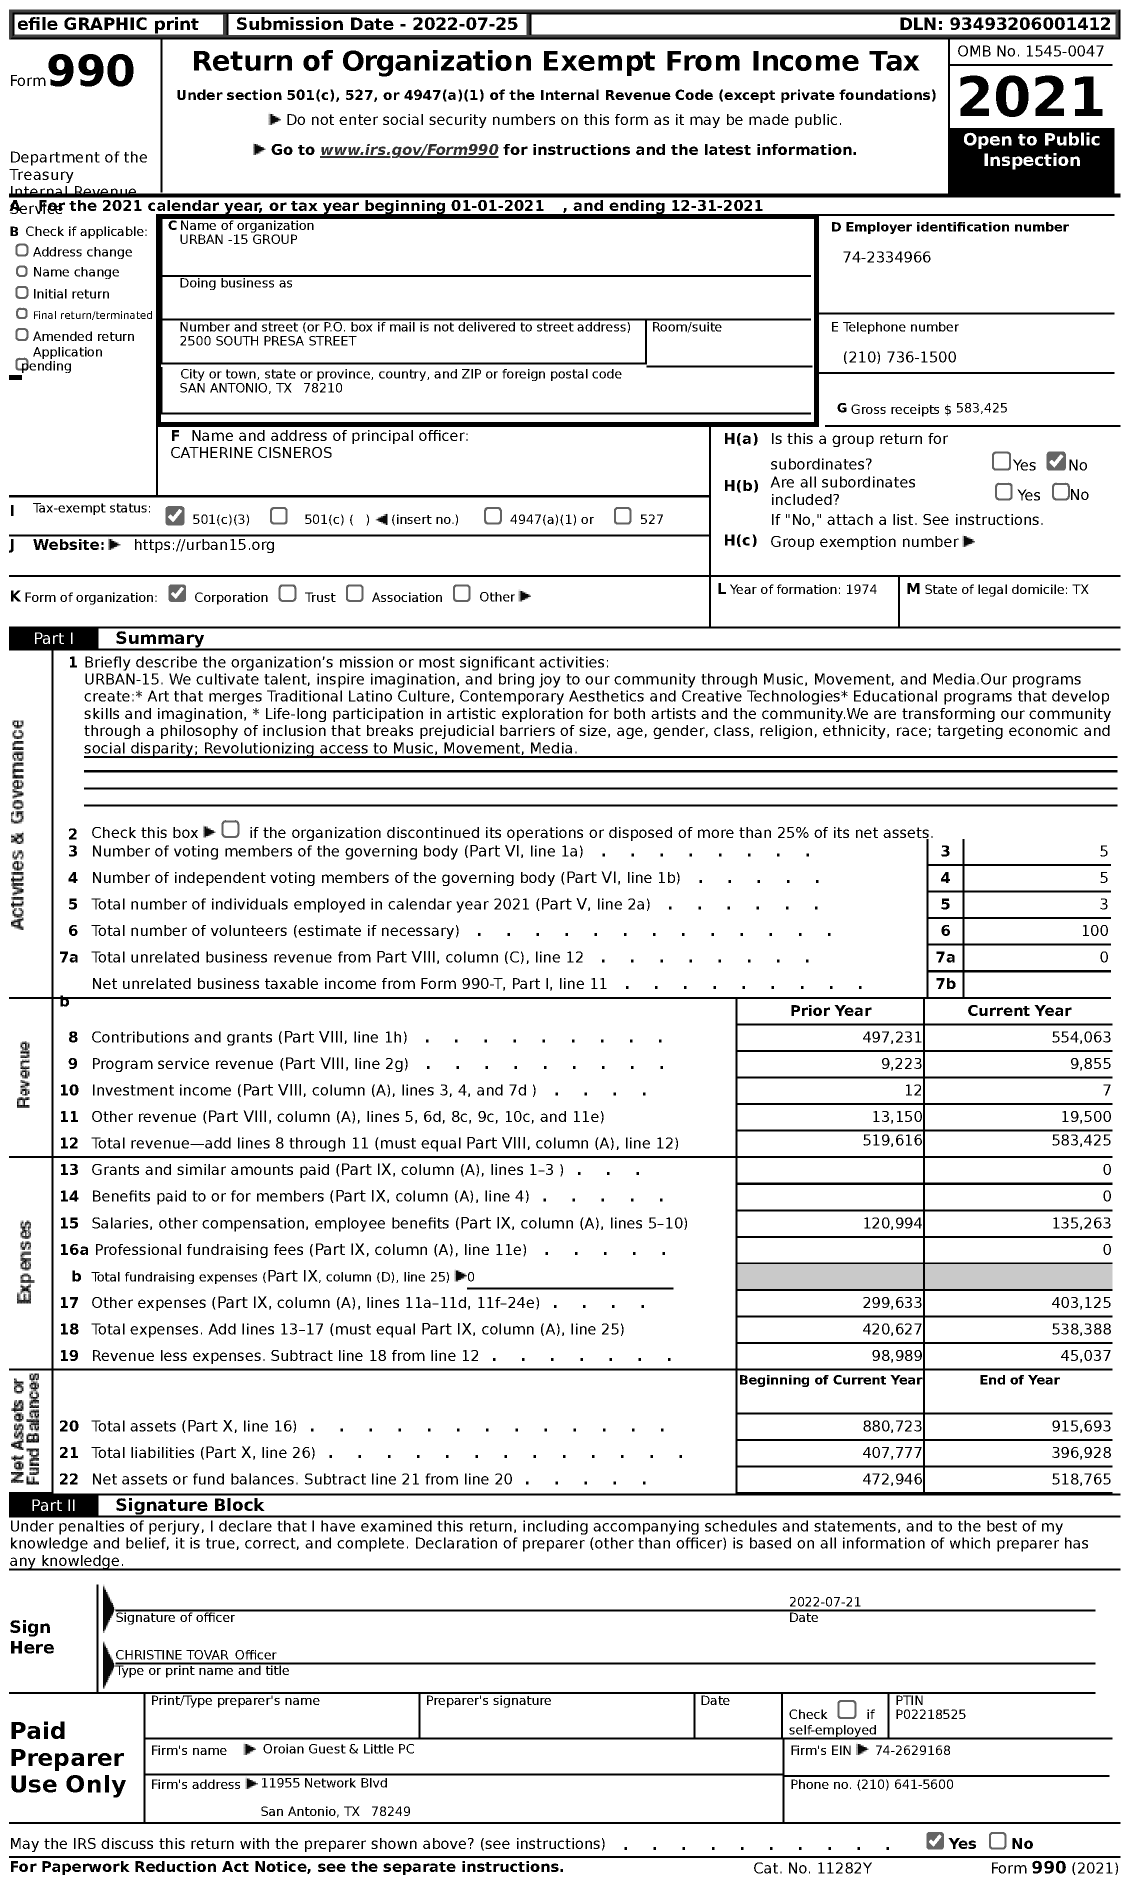 Image of first page of 2021 Form 990 for Urban -15 Group